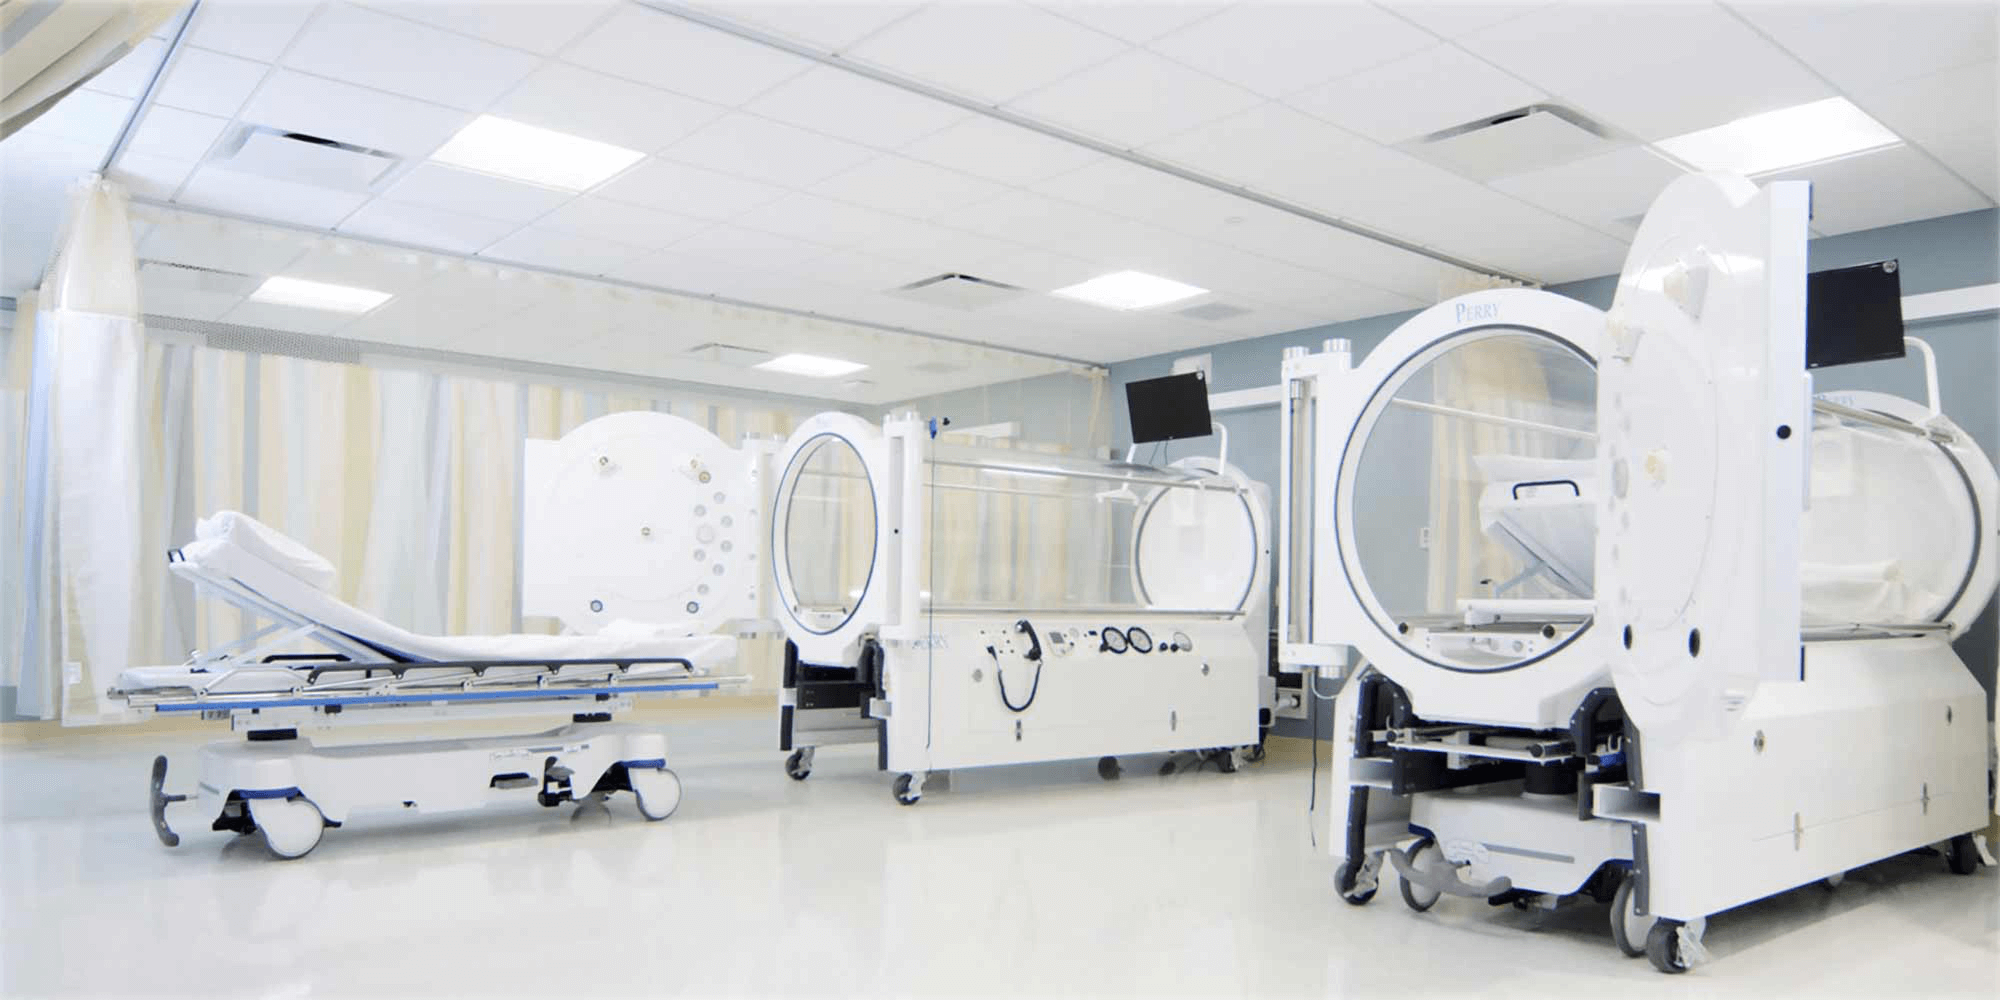 How to Treat Chronic Diseases with 1.3ATA portable hyperbaric chamber?